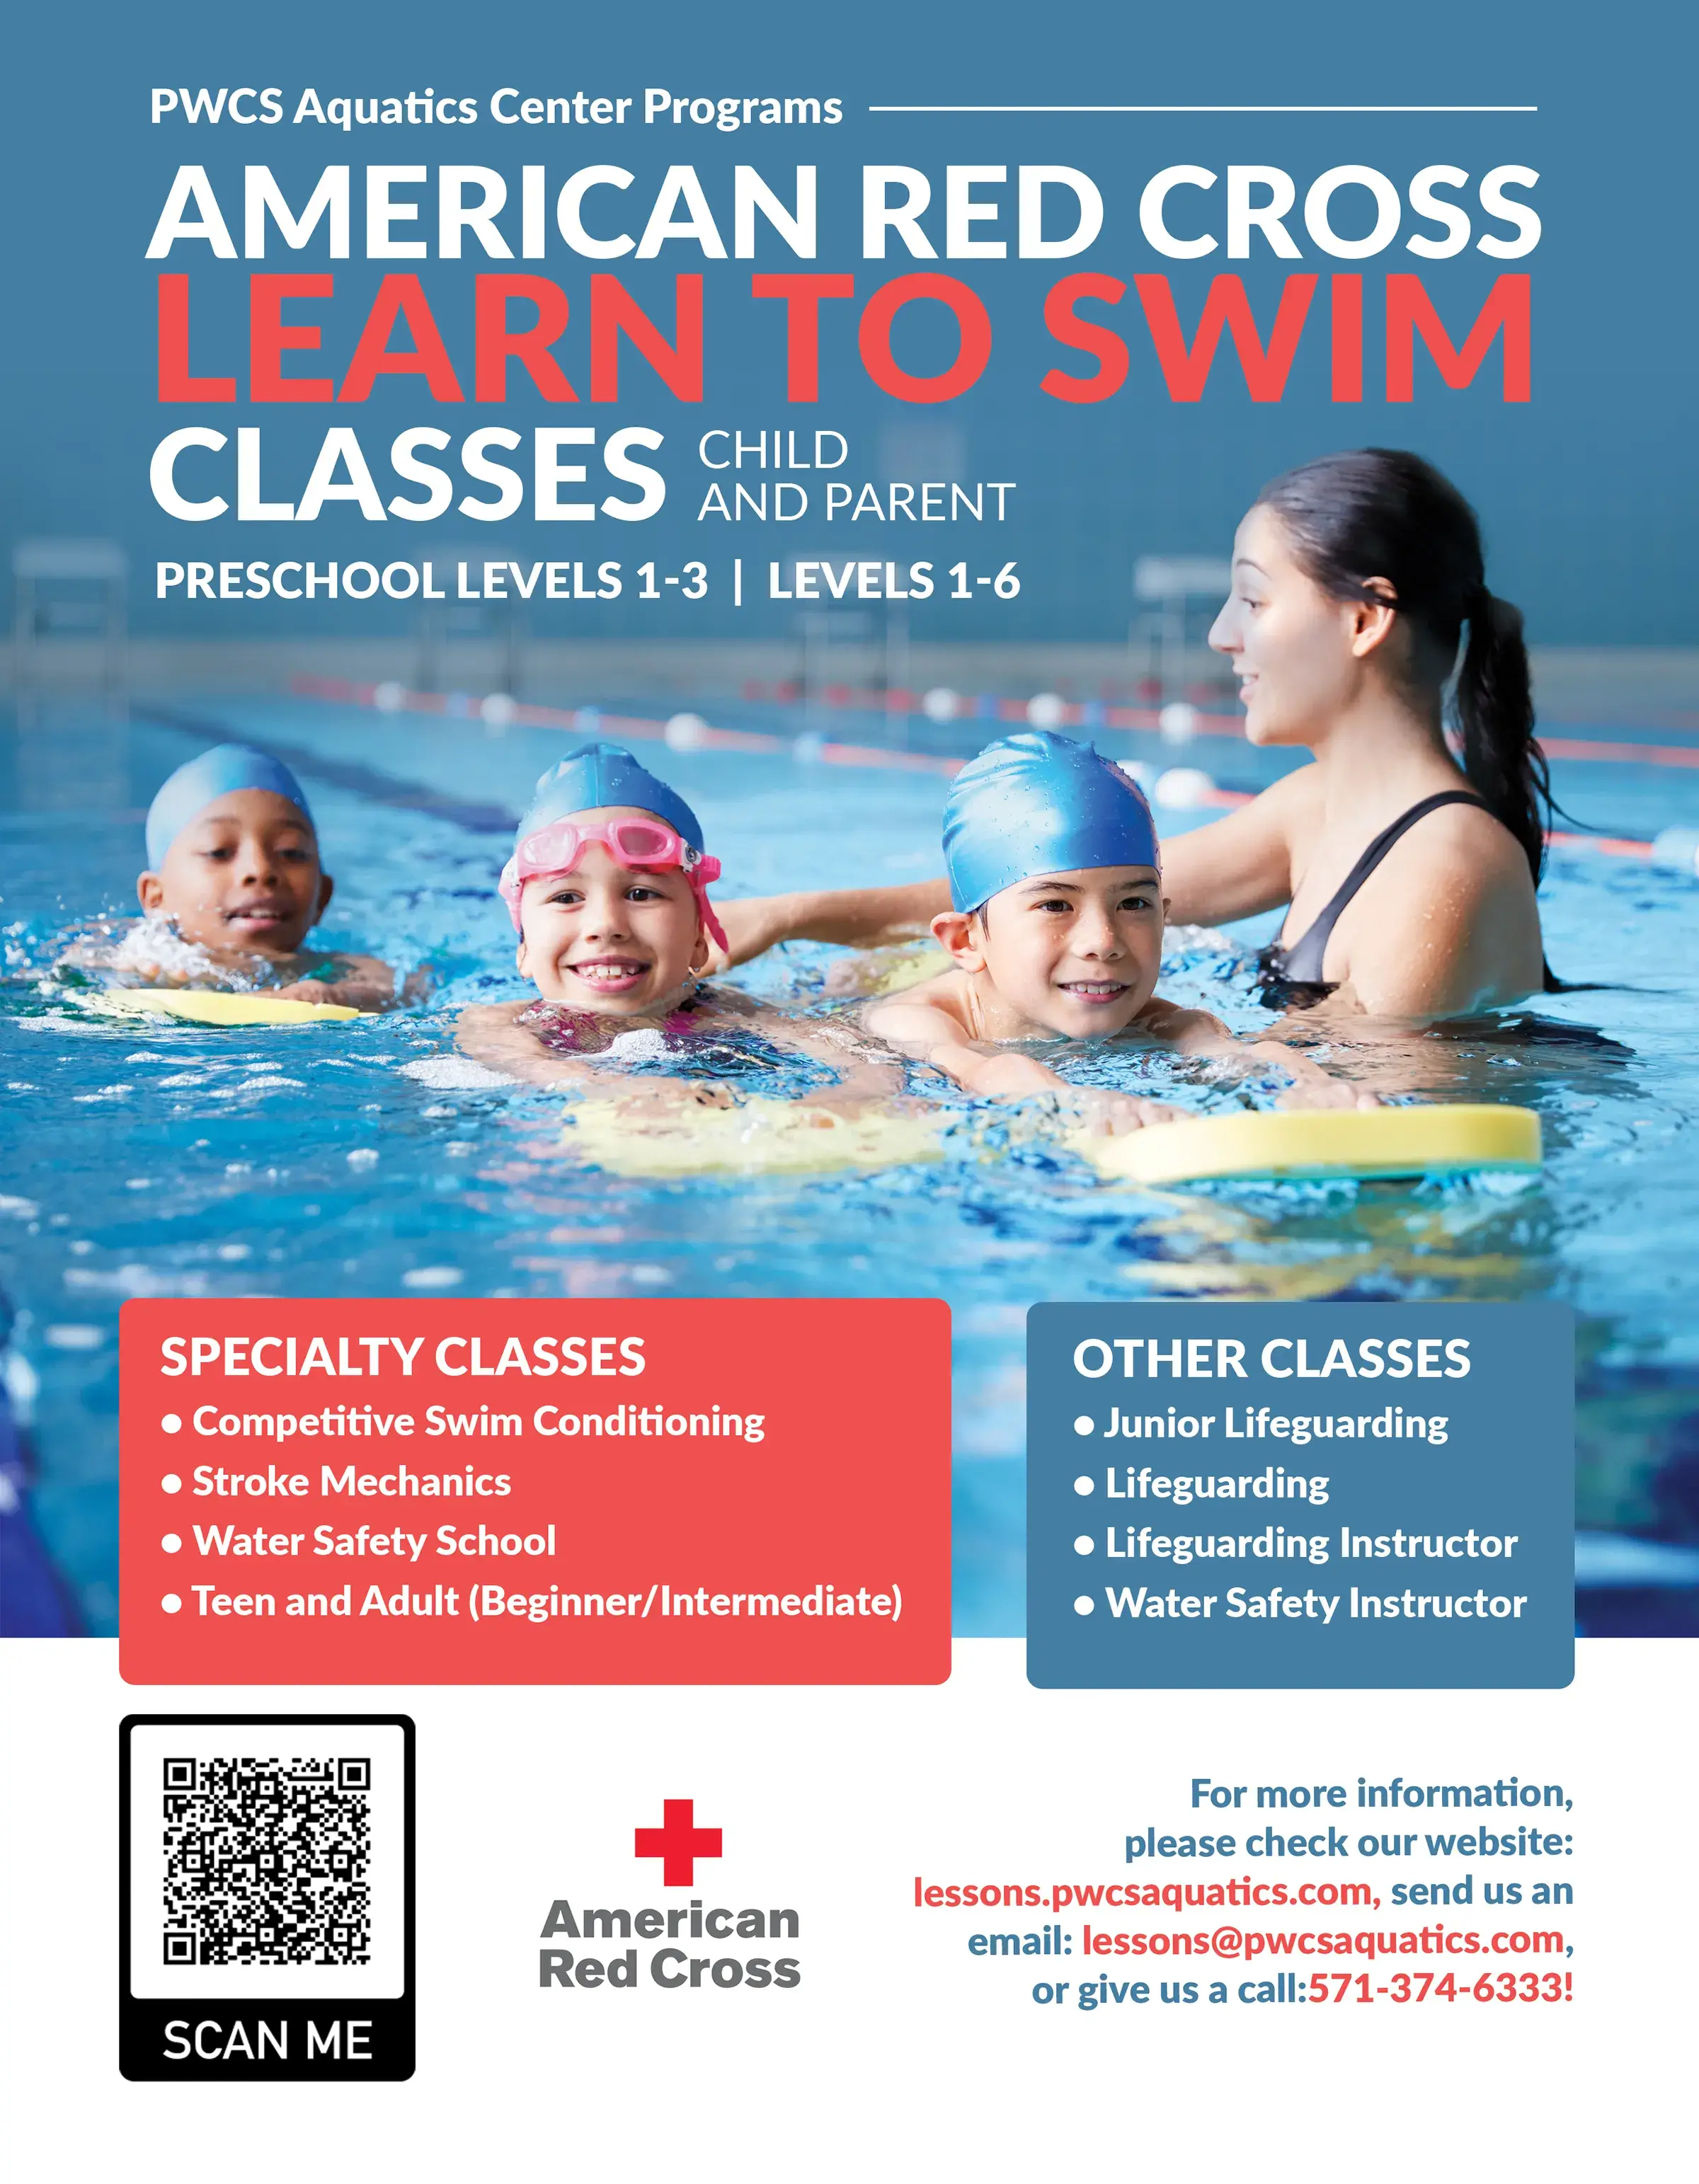 Promotional flyer for swim lessons at the PWCS Aquatics Center. Hyperlink to the swim lessons information page.